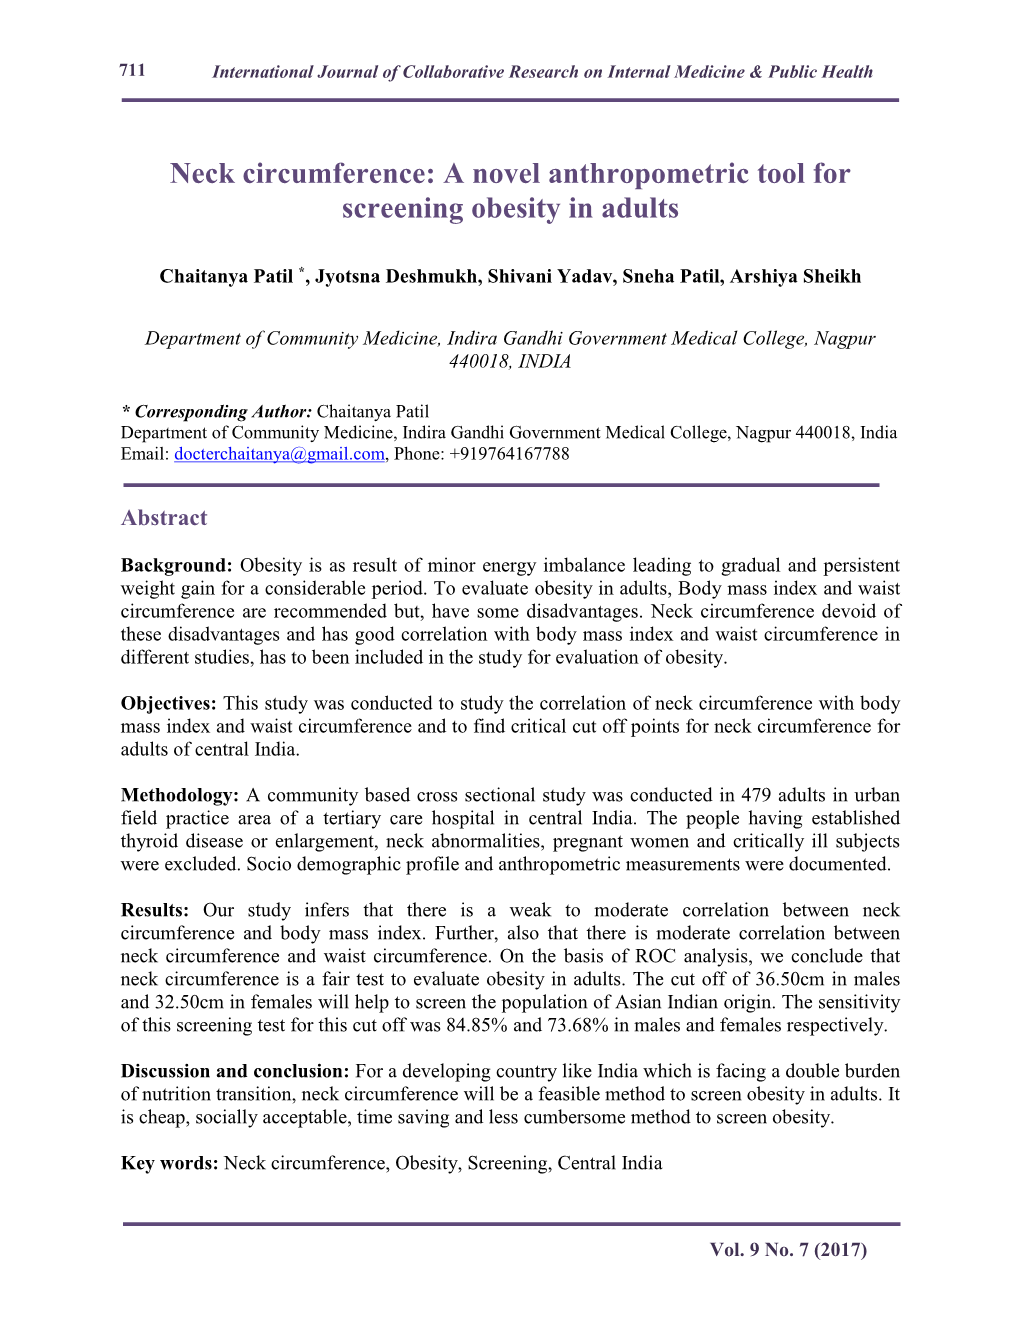 Neck Circumference: a Novel Anthropometric Tool for Screening Obesity in Adults